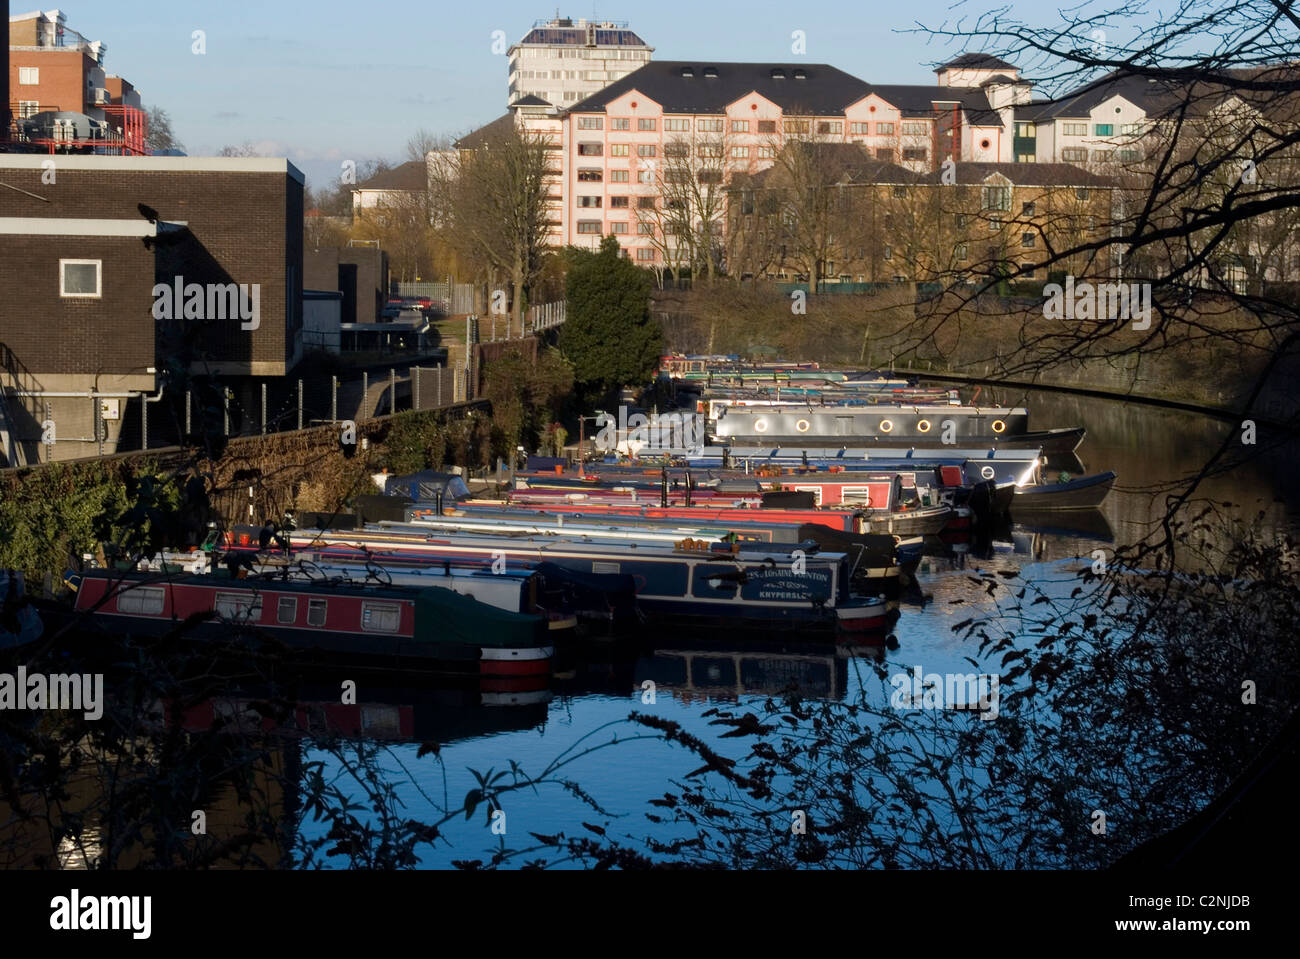 View of narrowboats on Lisson Wide, Regent's Canal, Lisson Grove, London, NW8, England Stock Photo